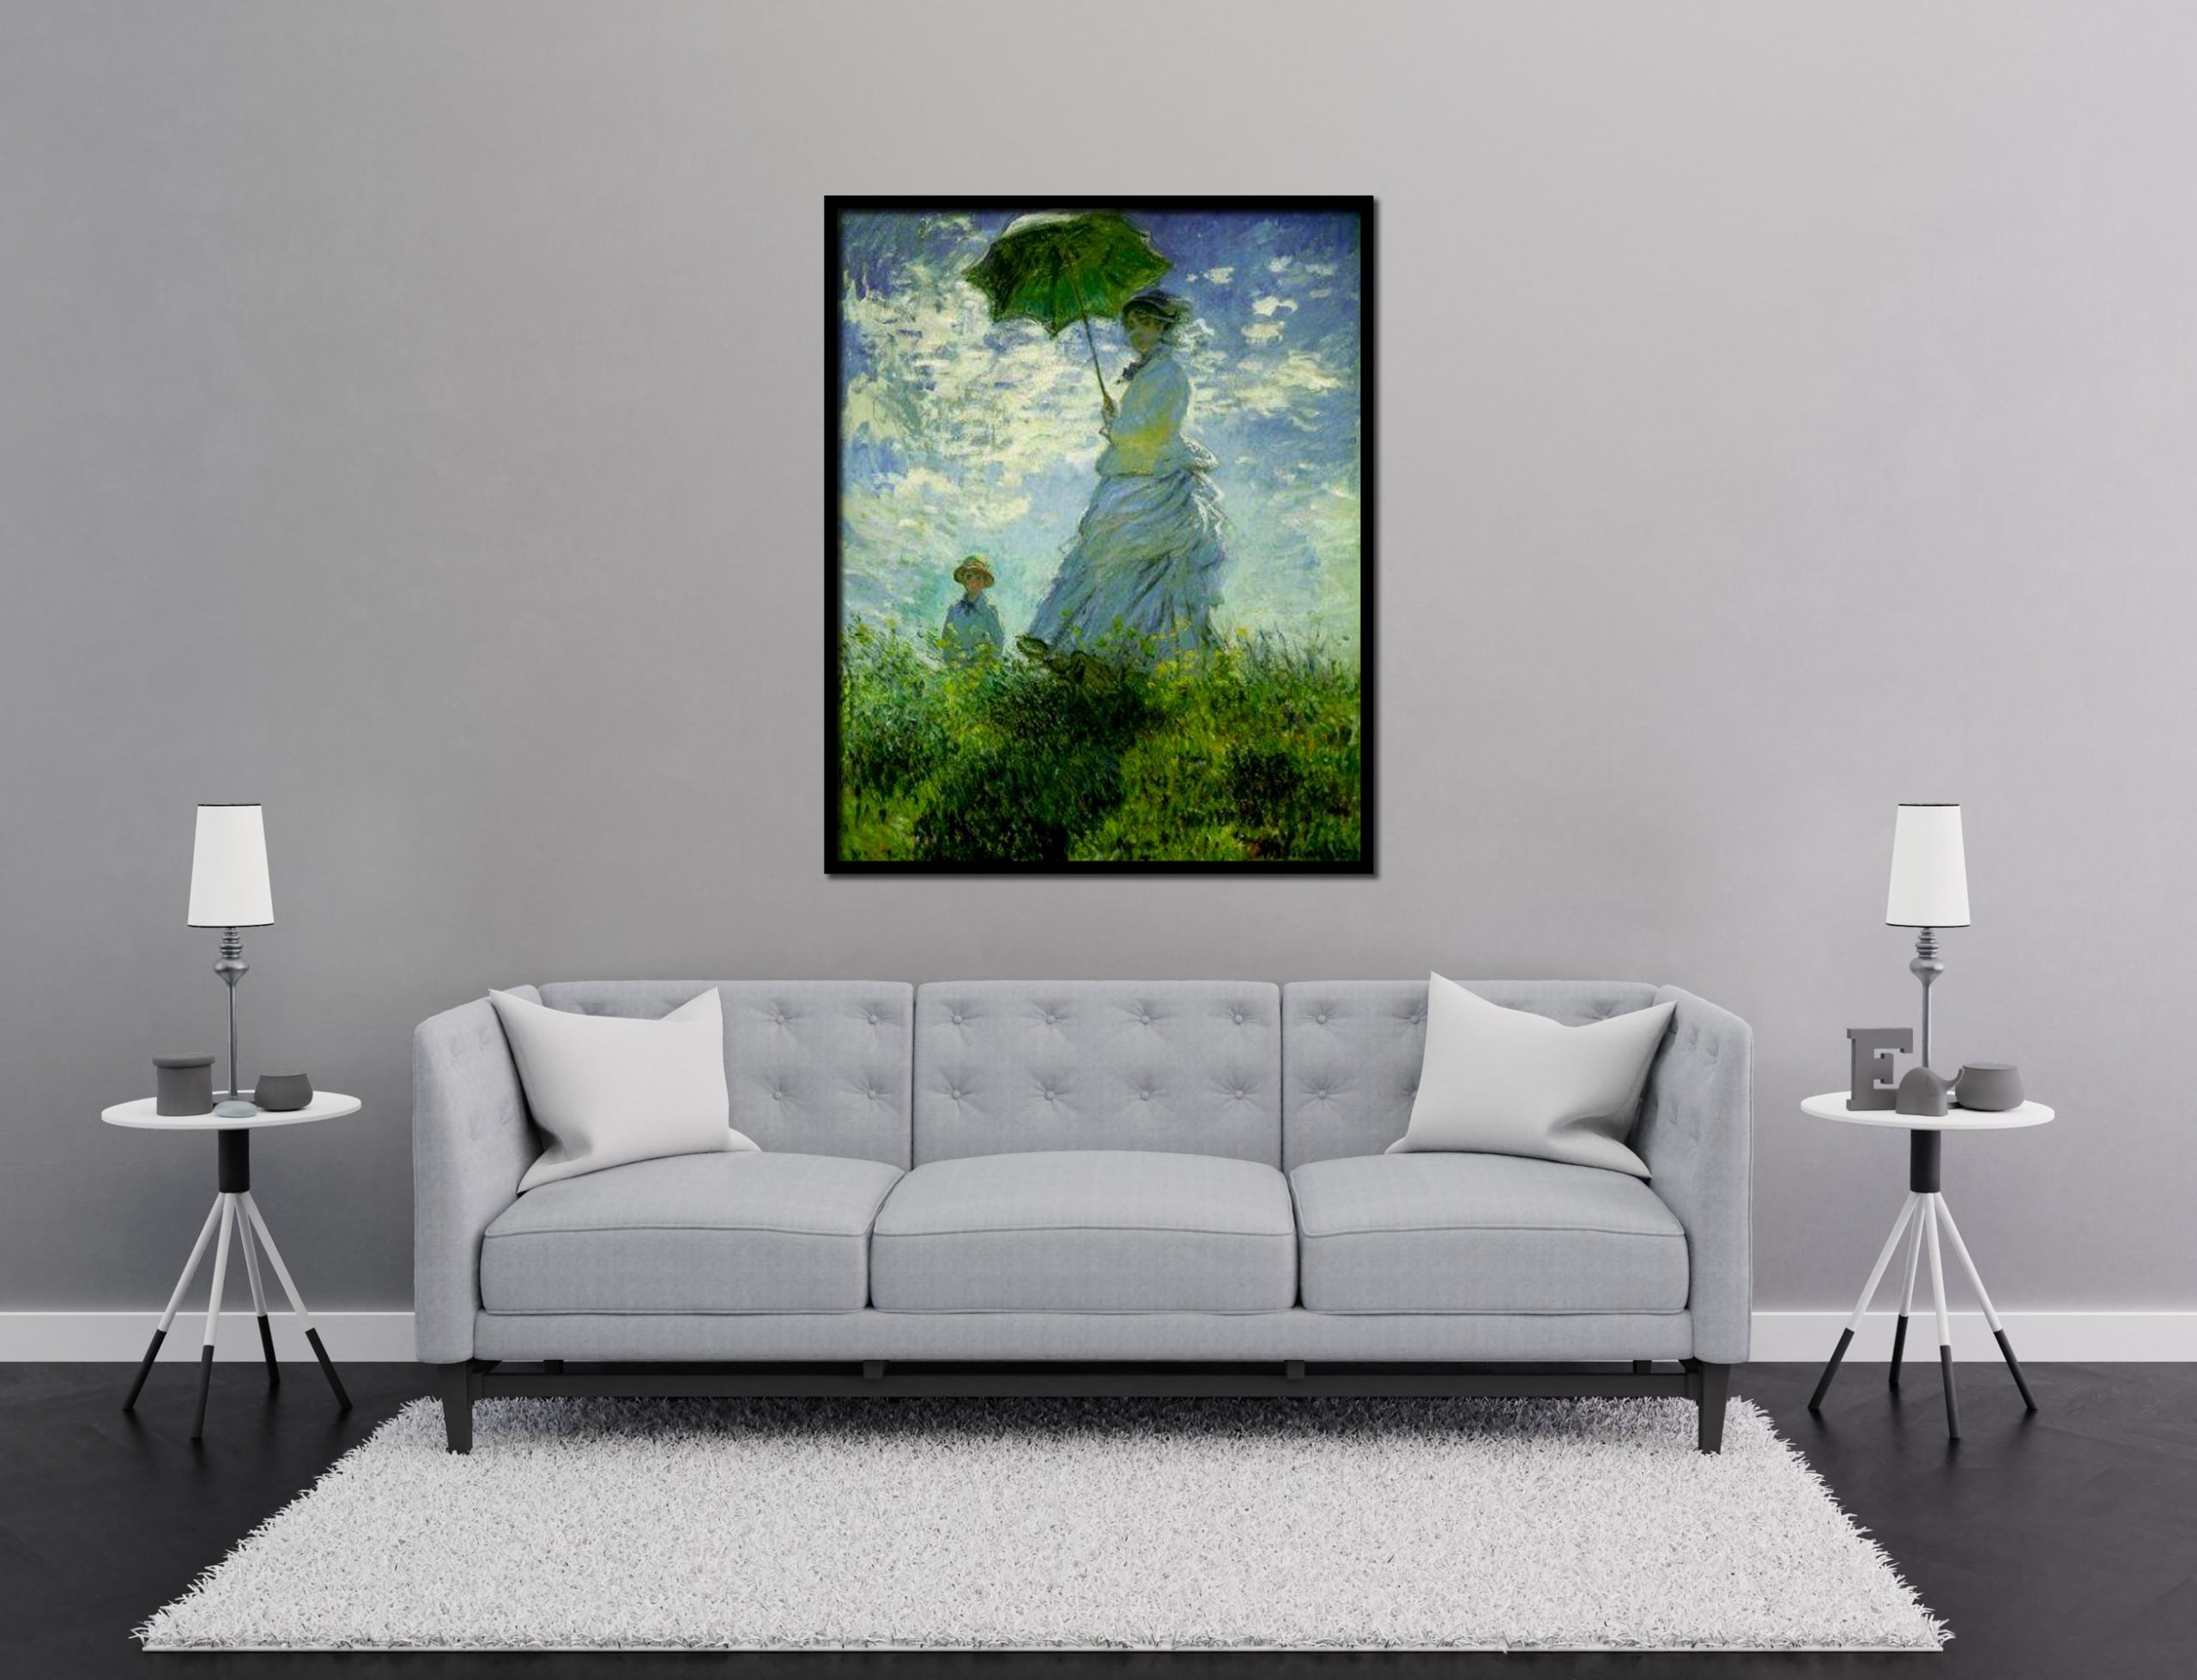 with Parasol - Oil - Online Now & Save!